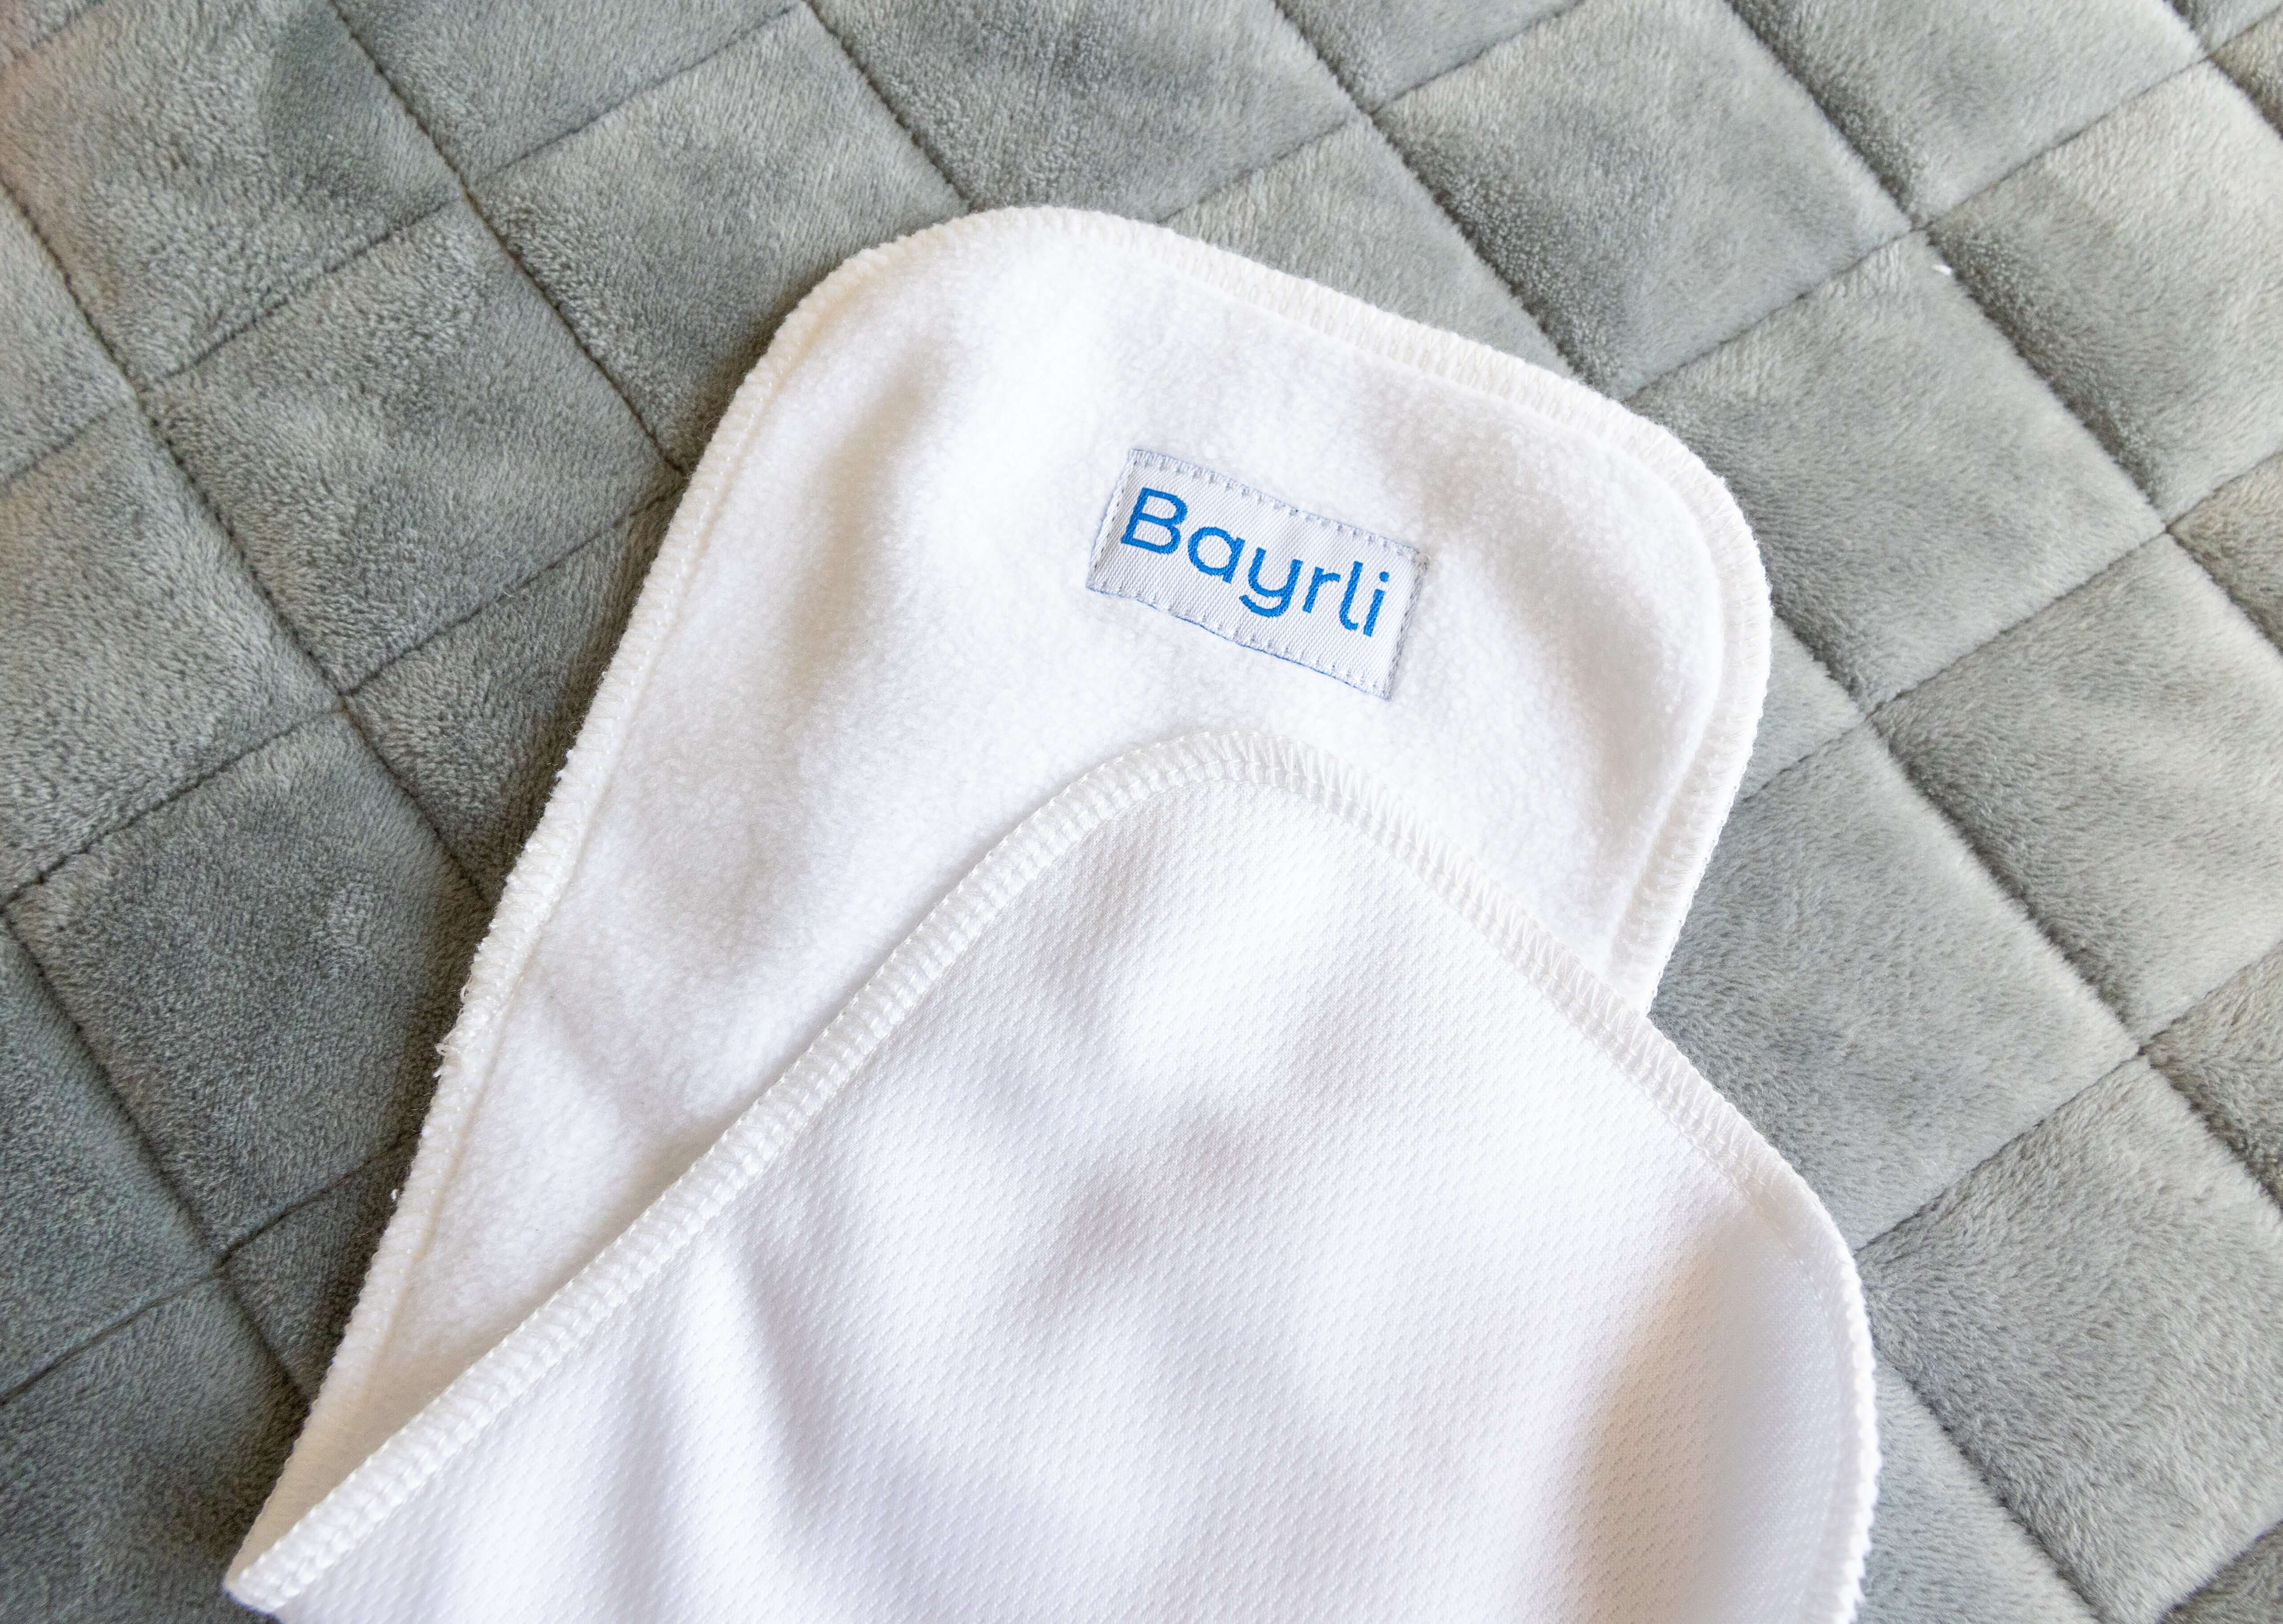 Bayrli®Everything you need to know about diaper liners